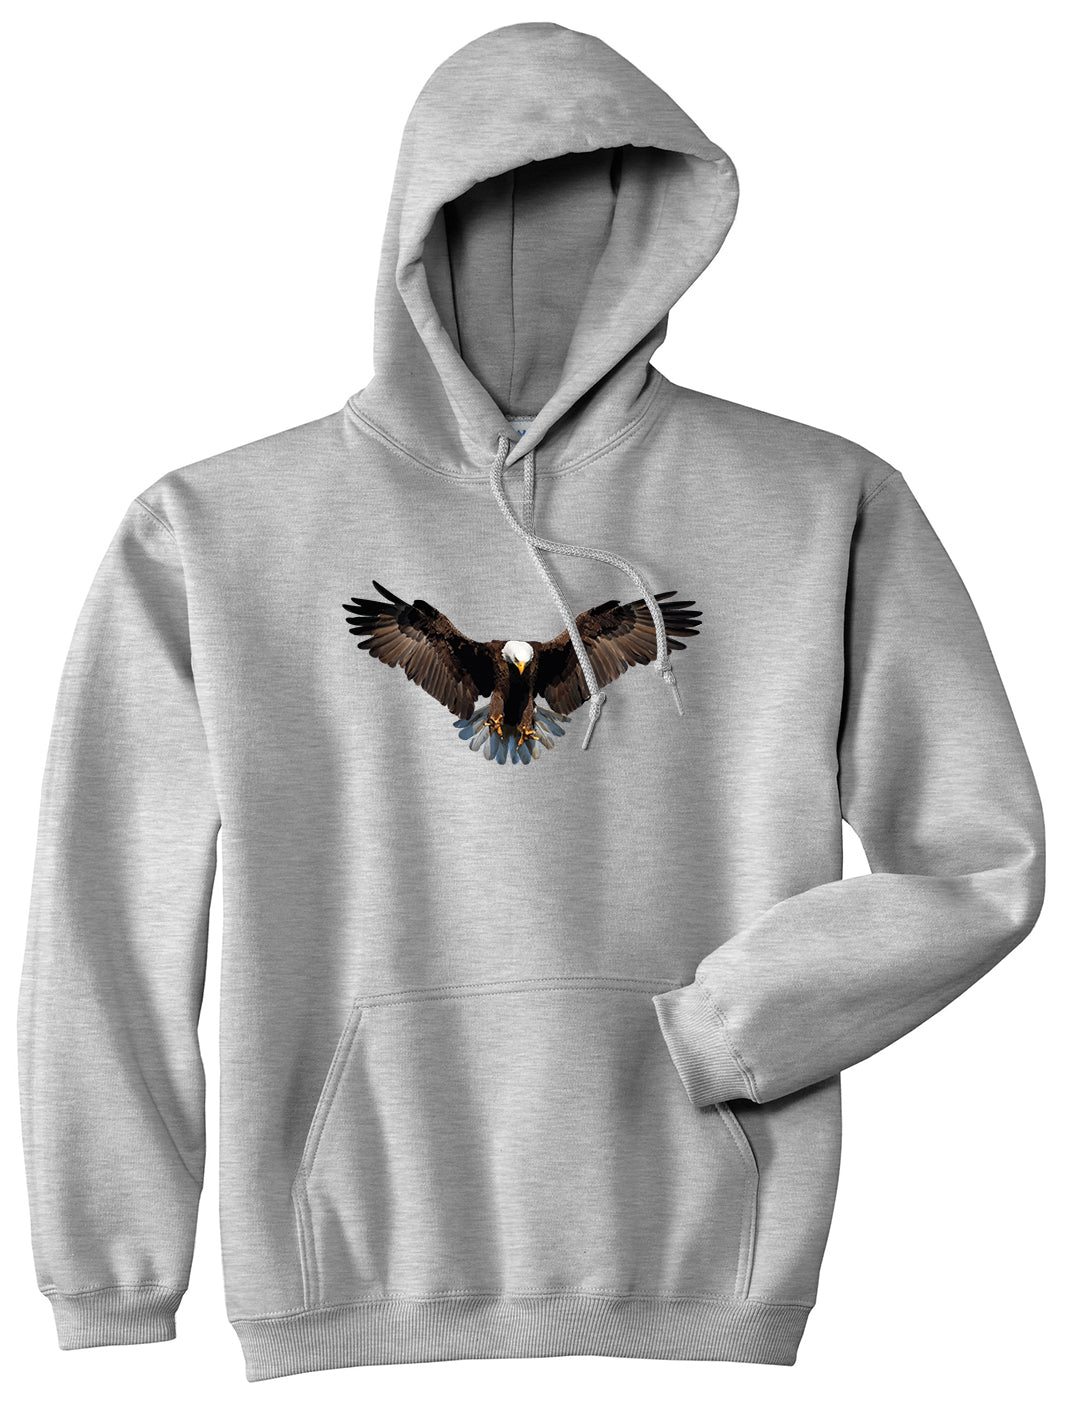 Bald Eagle Wings Spread Grey Pullover Hoodie by Kings Of NY